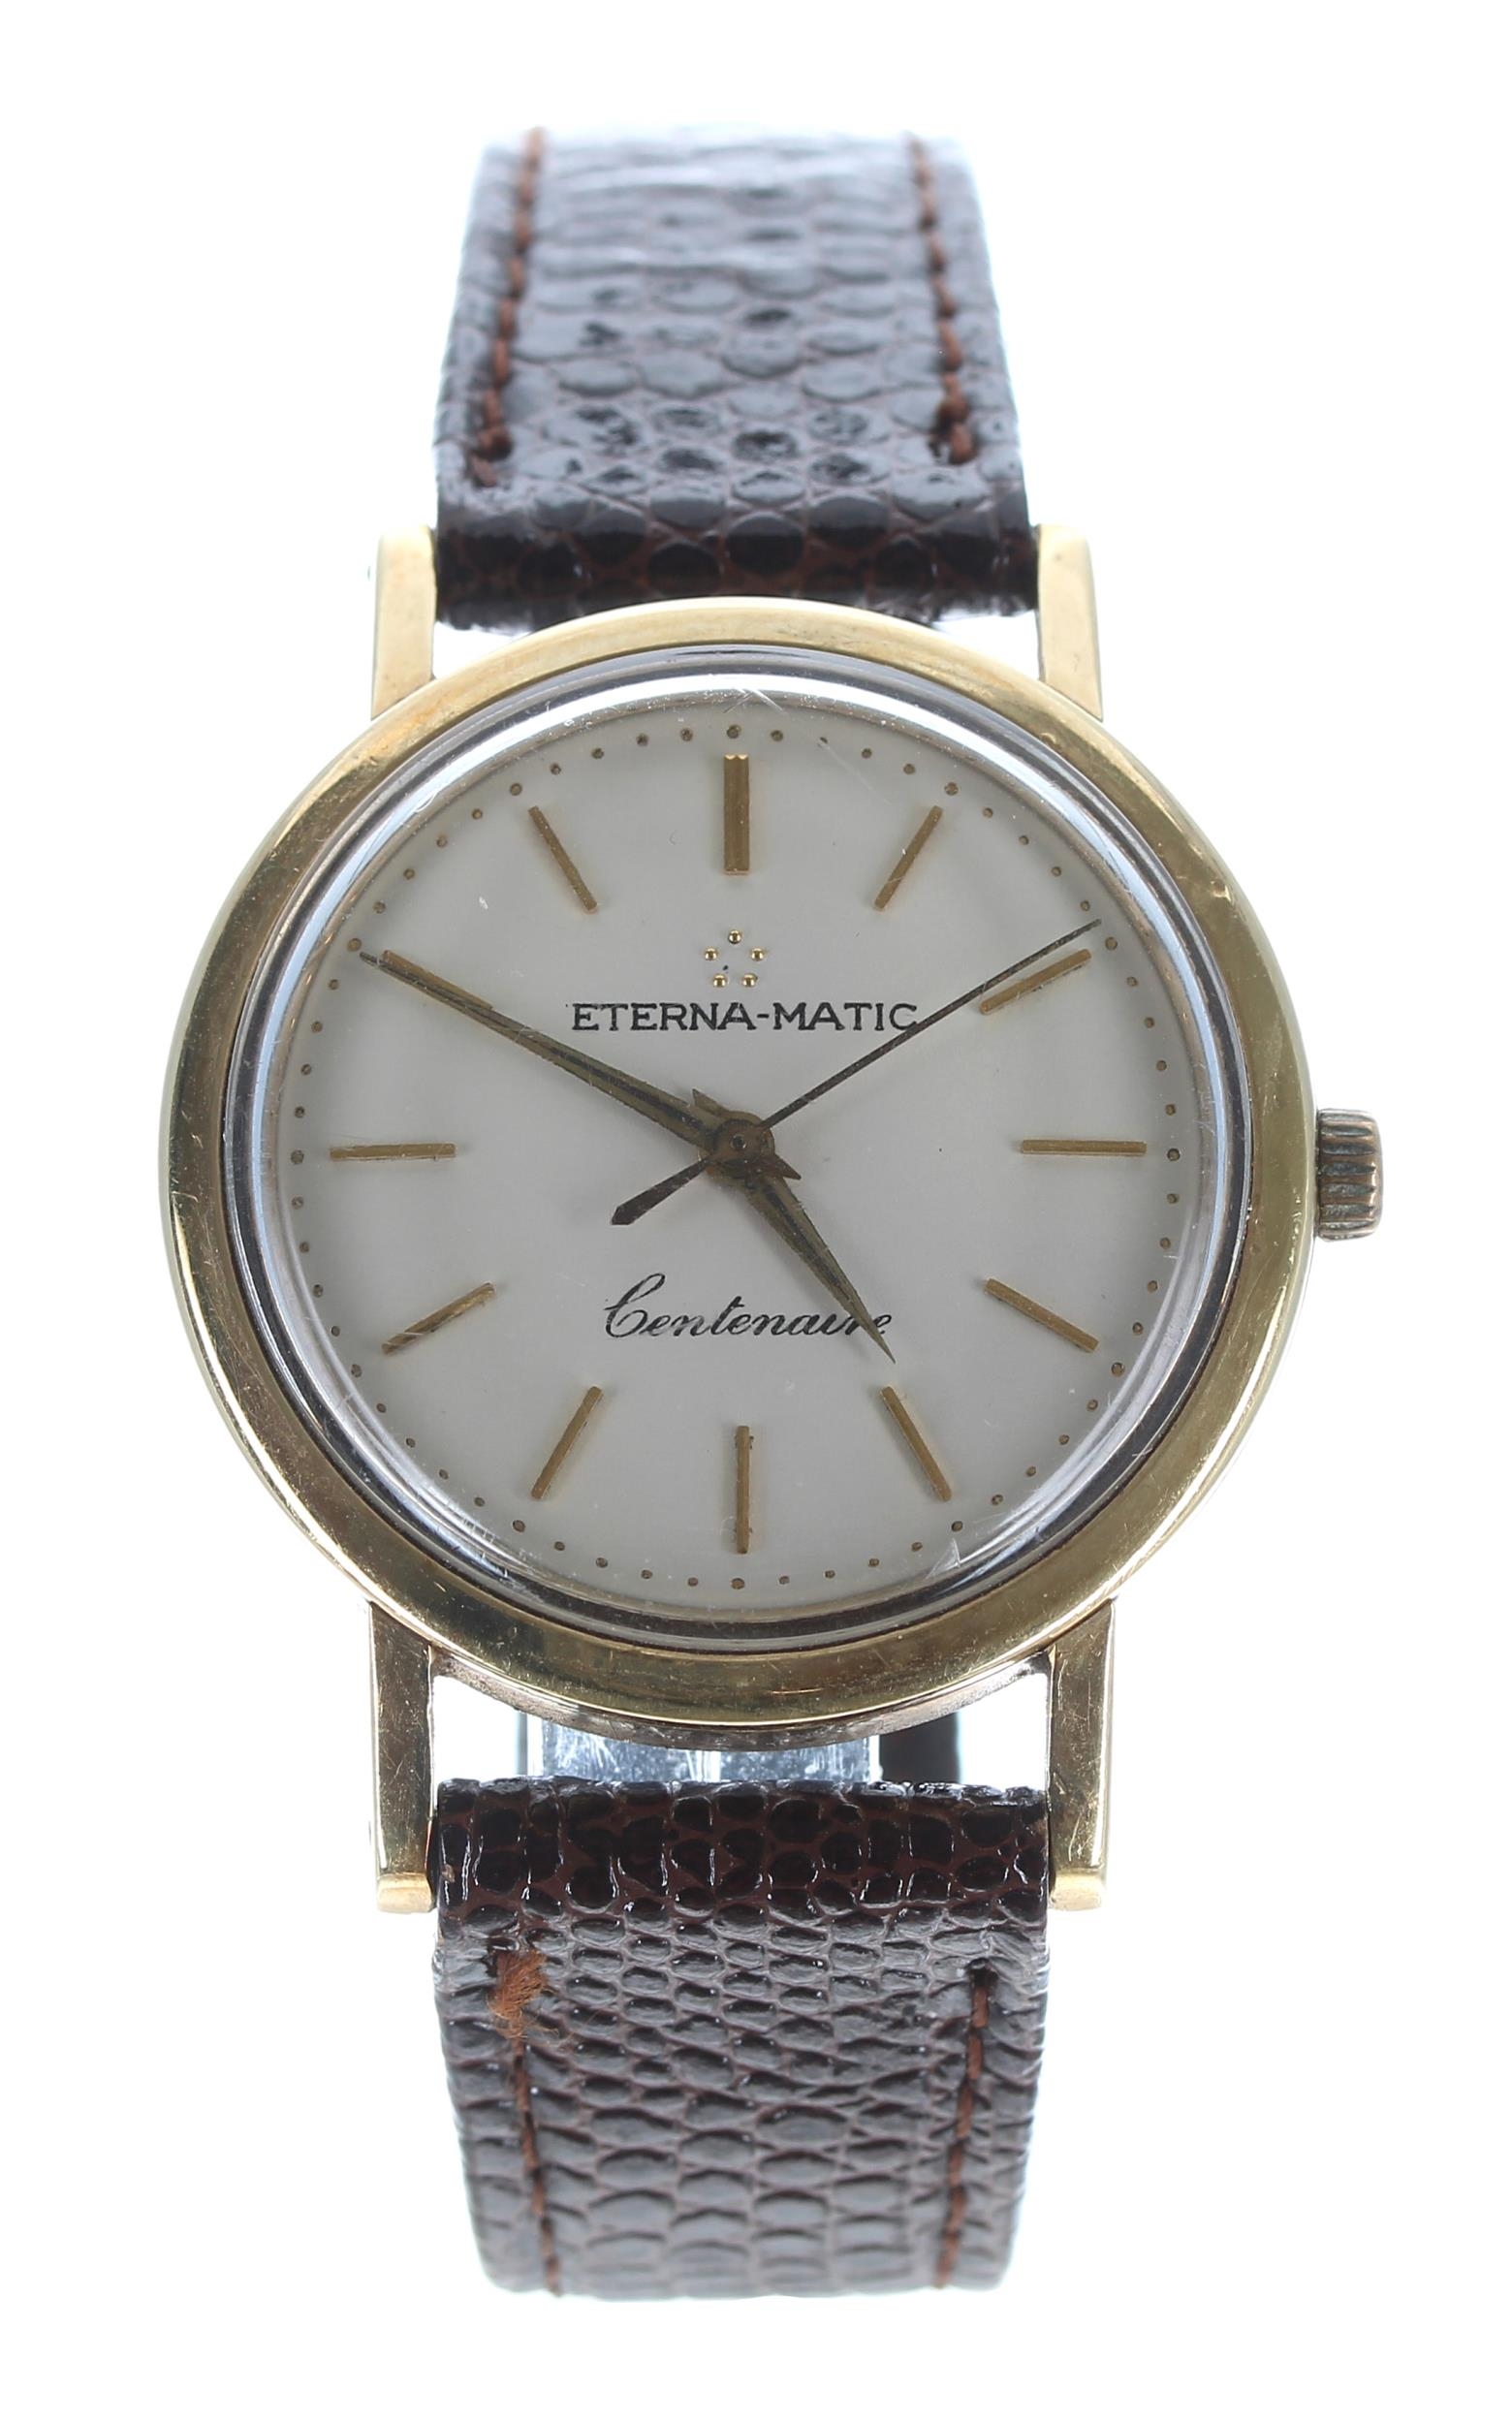 Eterna-Matic Centenaire automatic gold plated and stainless steel gentleman's wristwatch, silvered